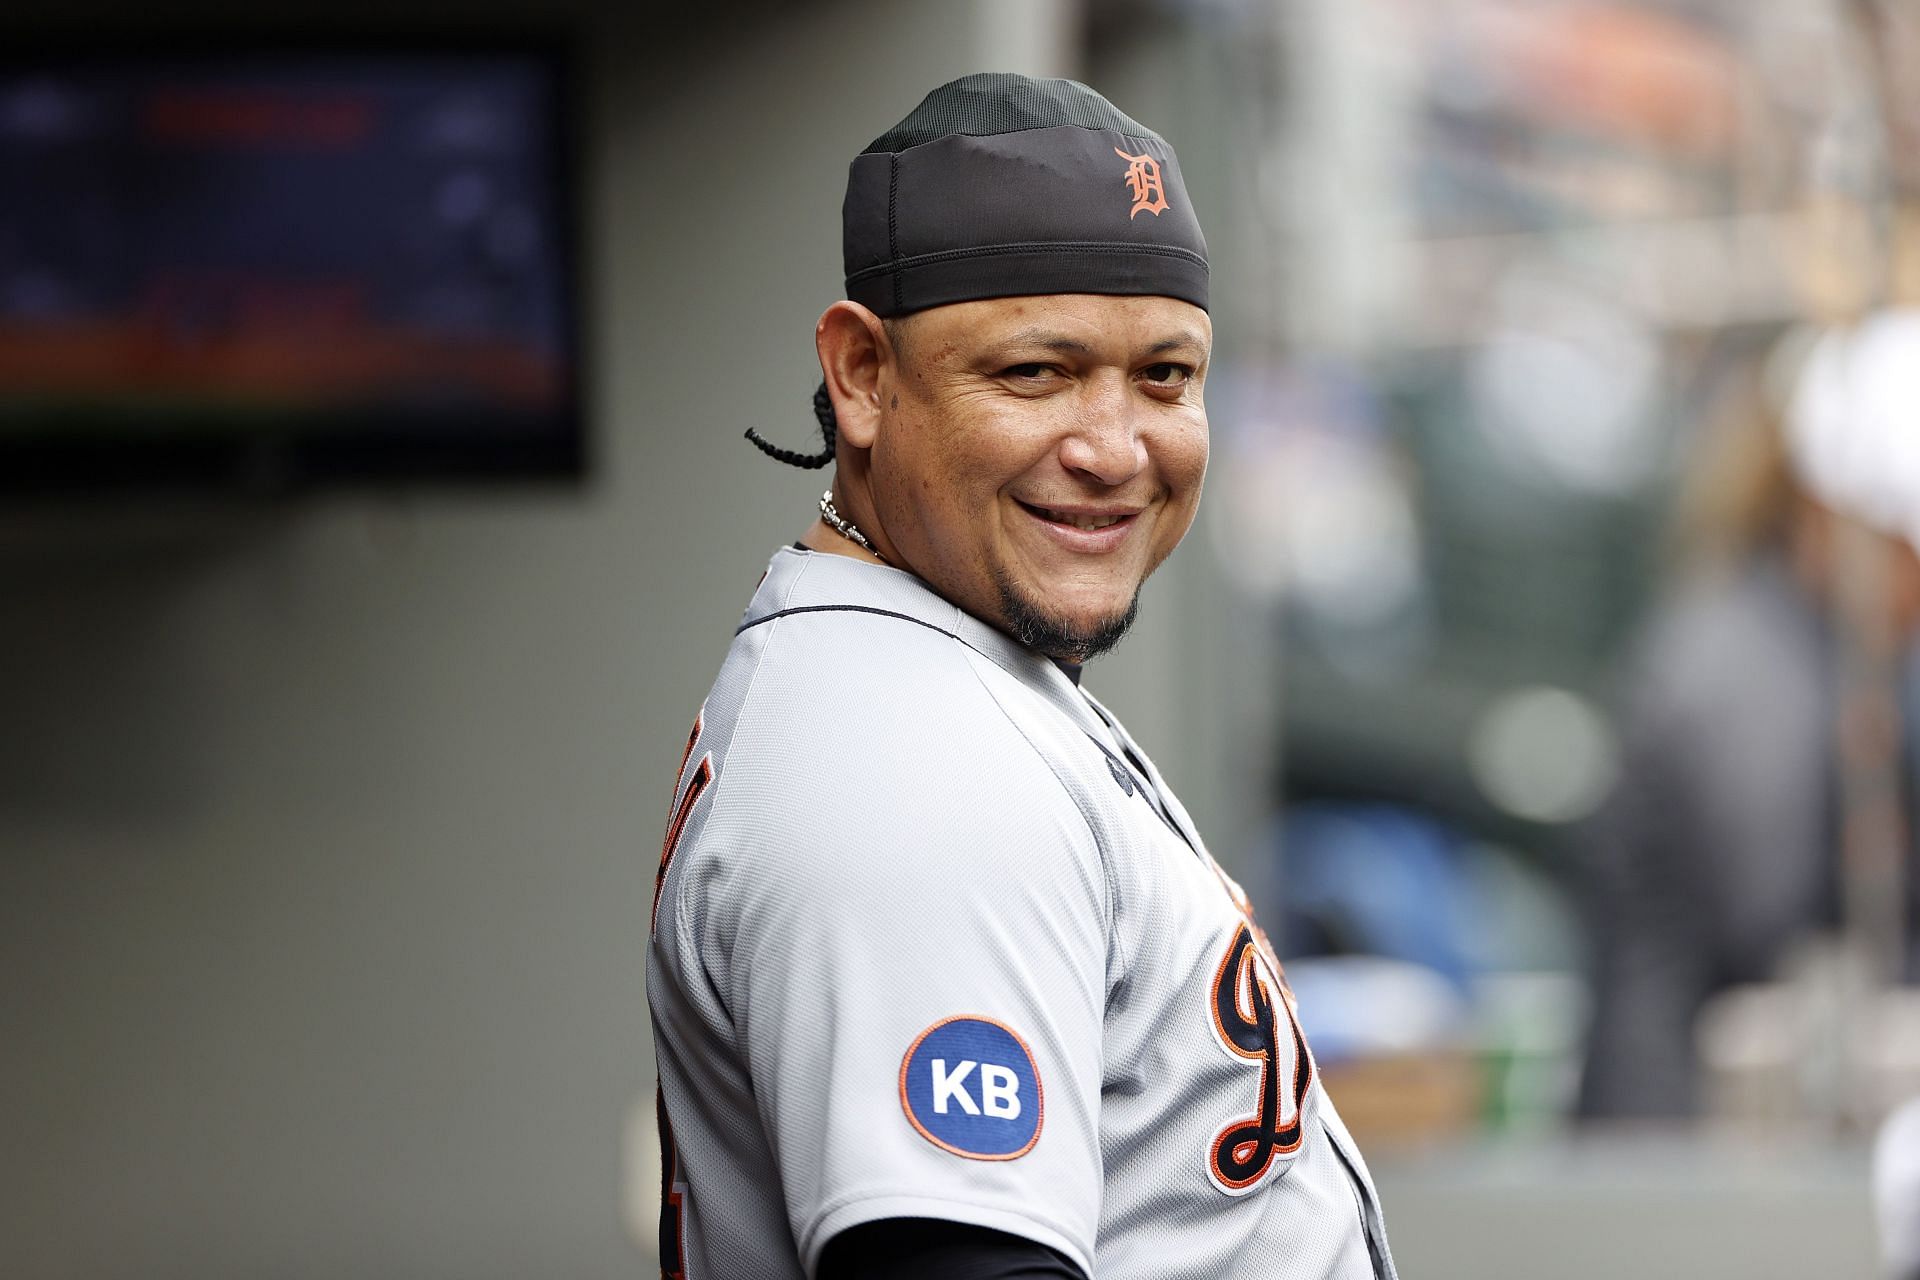 Behind the blockbuster trade that took Miguel Cabrera from Marlins